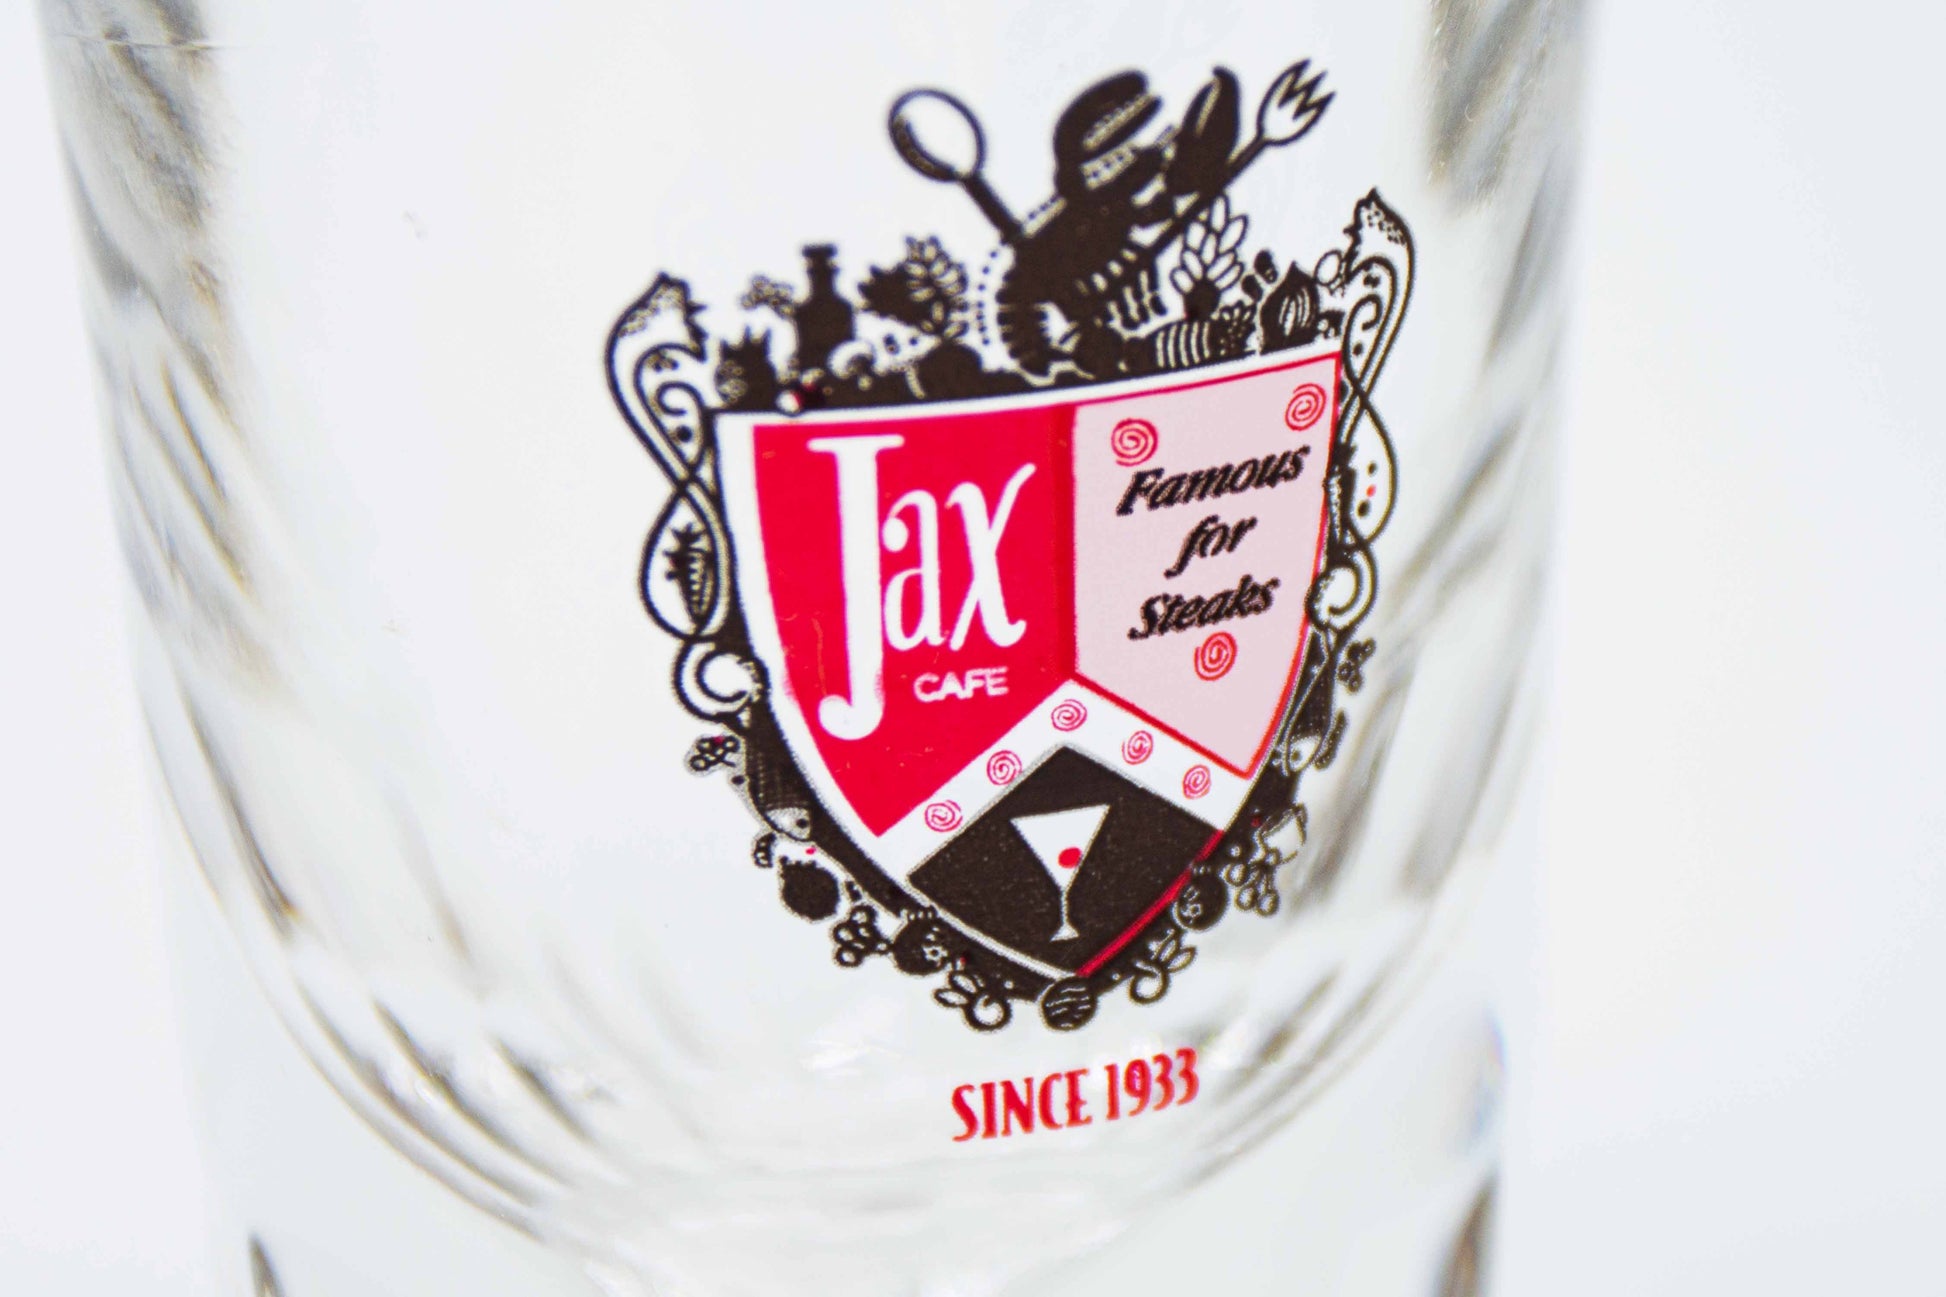 Close up of the shot glass with the text "jax cafe famous for steaks since 1933"